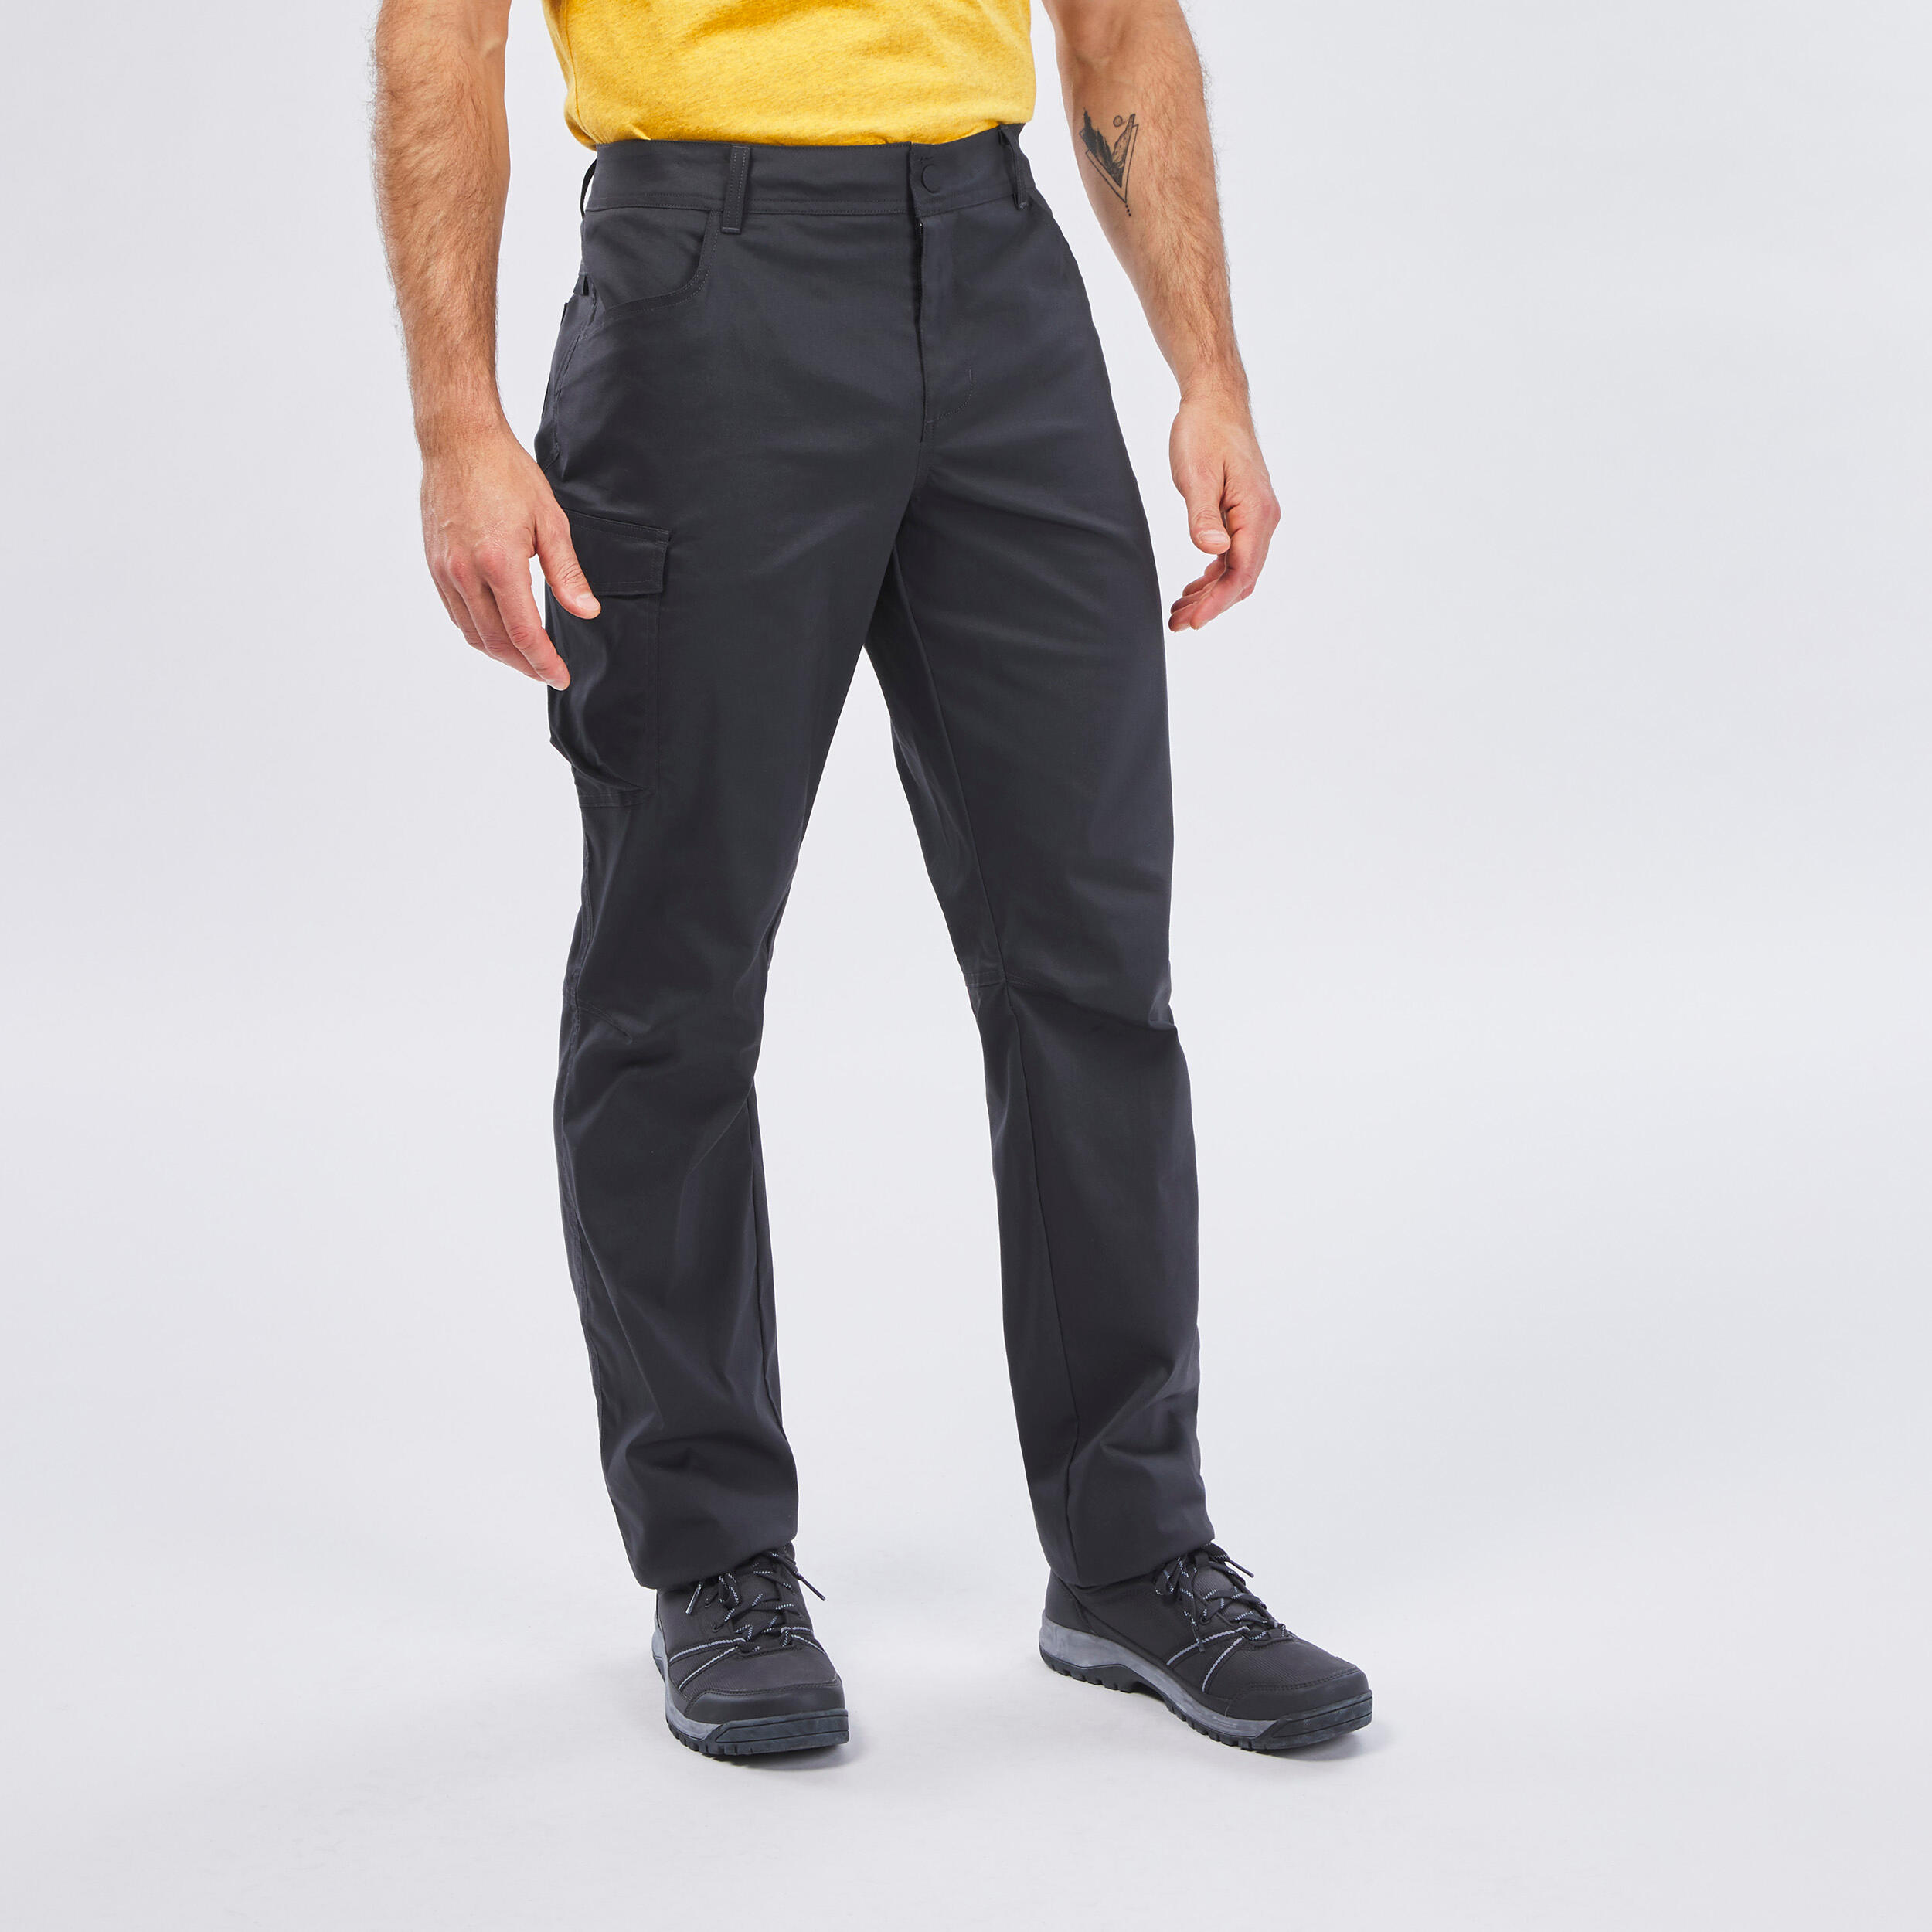 Buy Black Trousers & Pants for Men by Columbia Online | Ajio.com